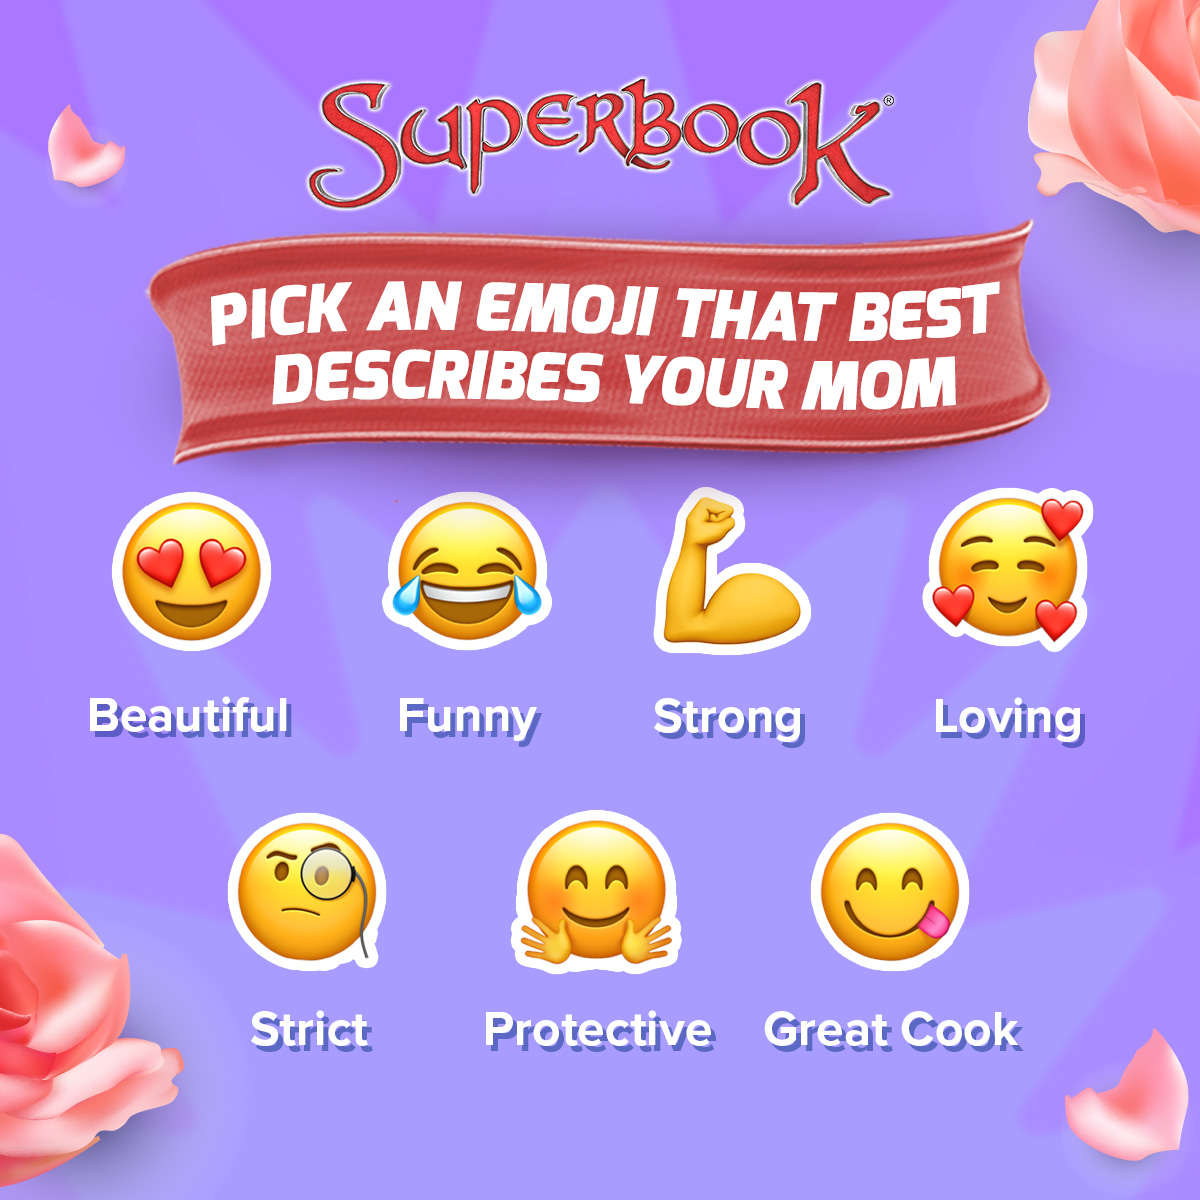 Share your answer with us! ⬇️🥰✨

#MothersDay
#ILoveMom
#Motherhood